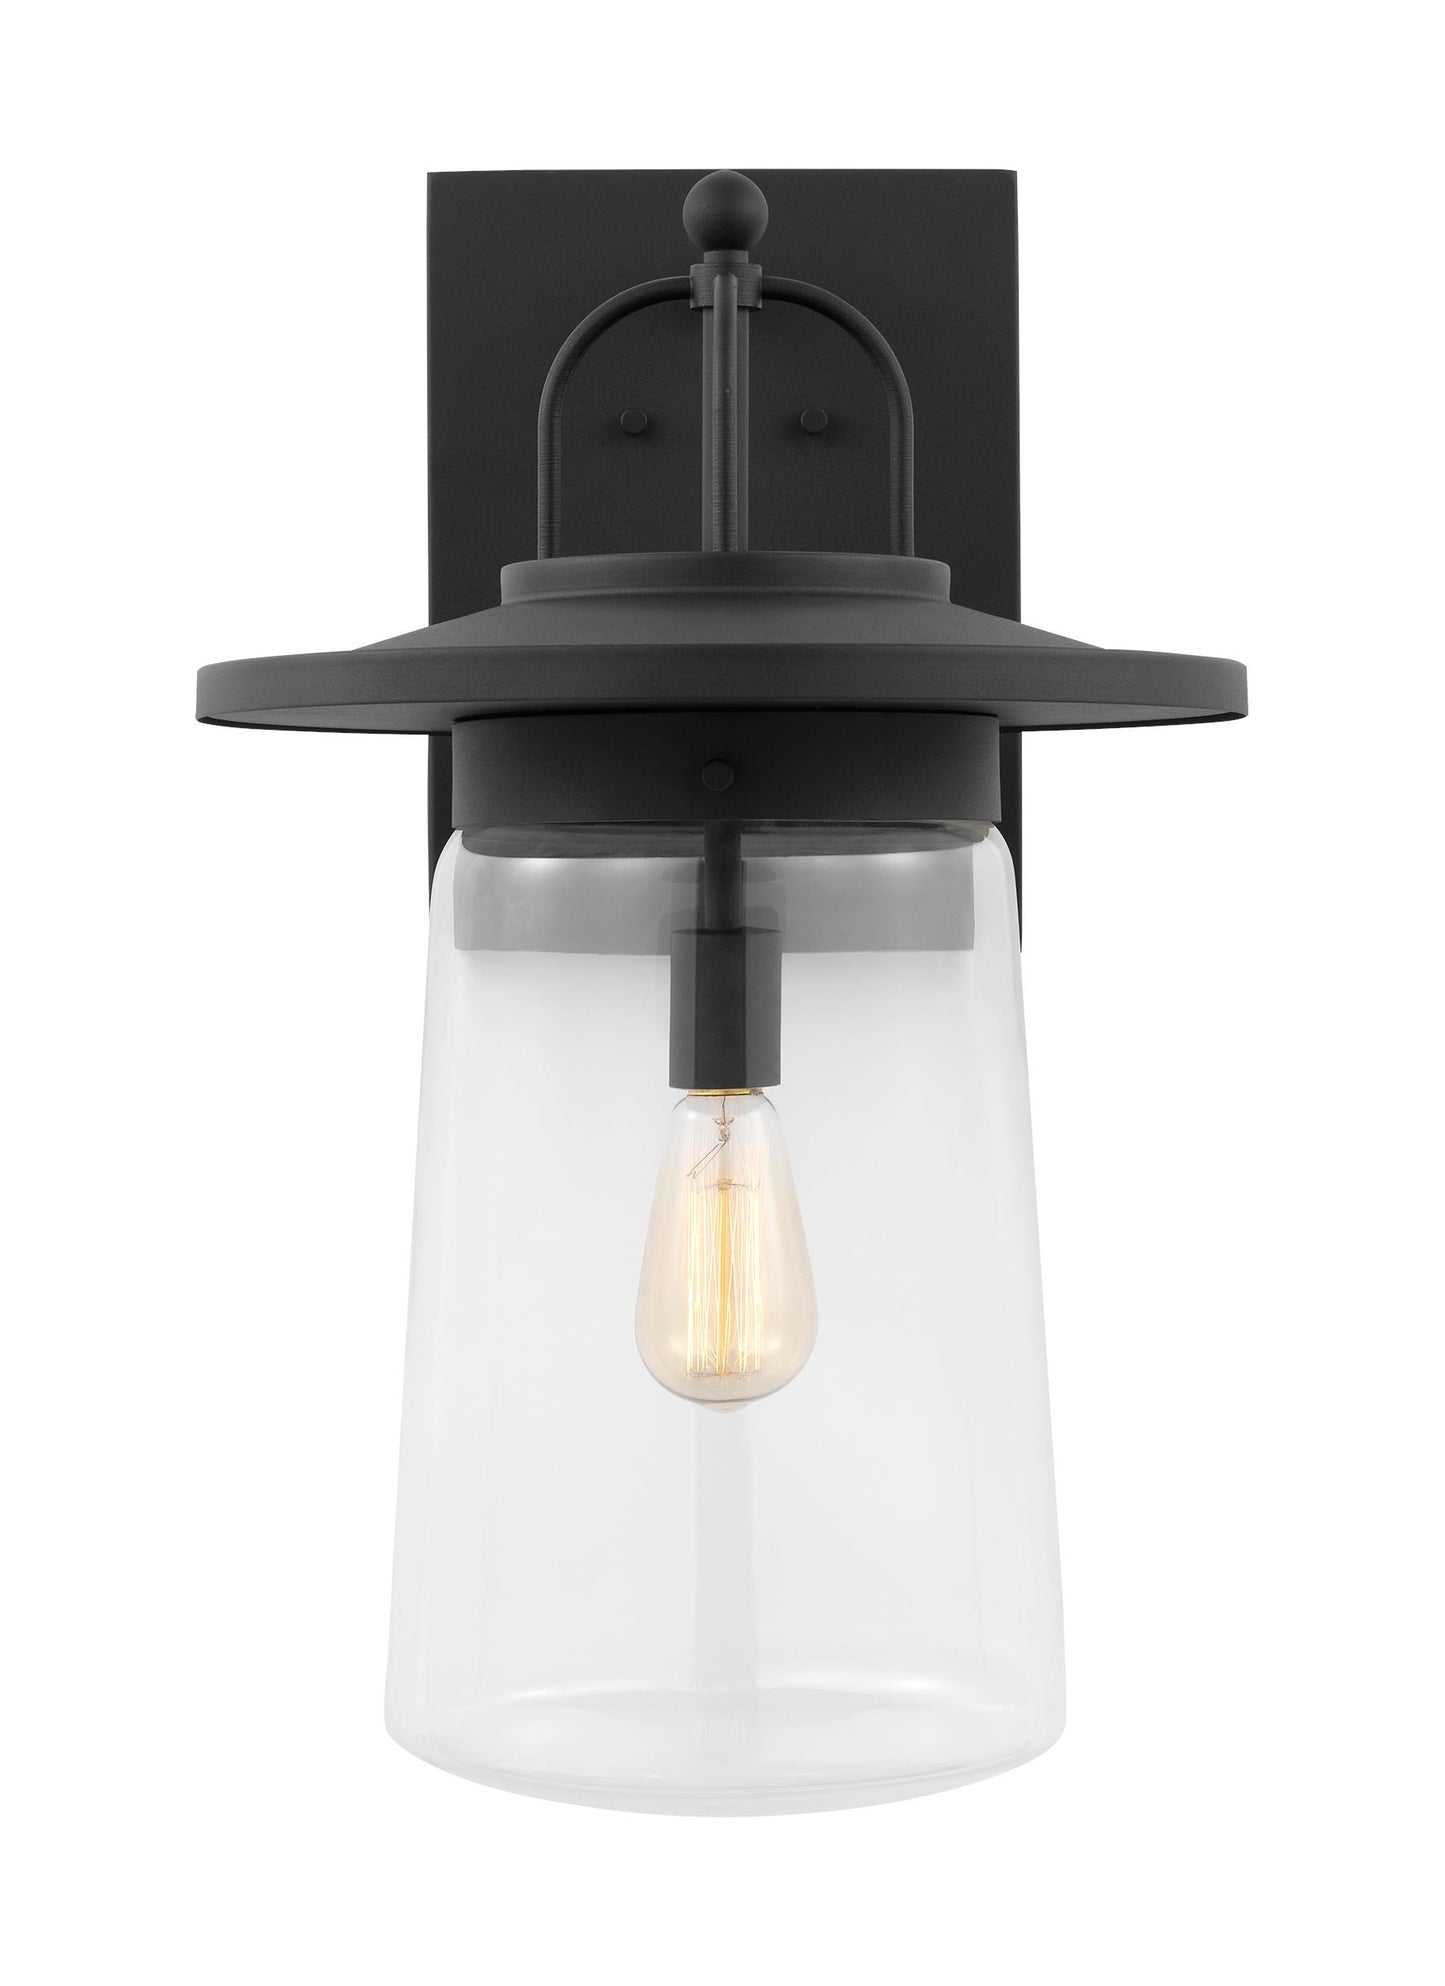 Tybee traditional 1-light outdoor exterior extra-large wall lantern in black finish with clear glass shade